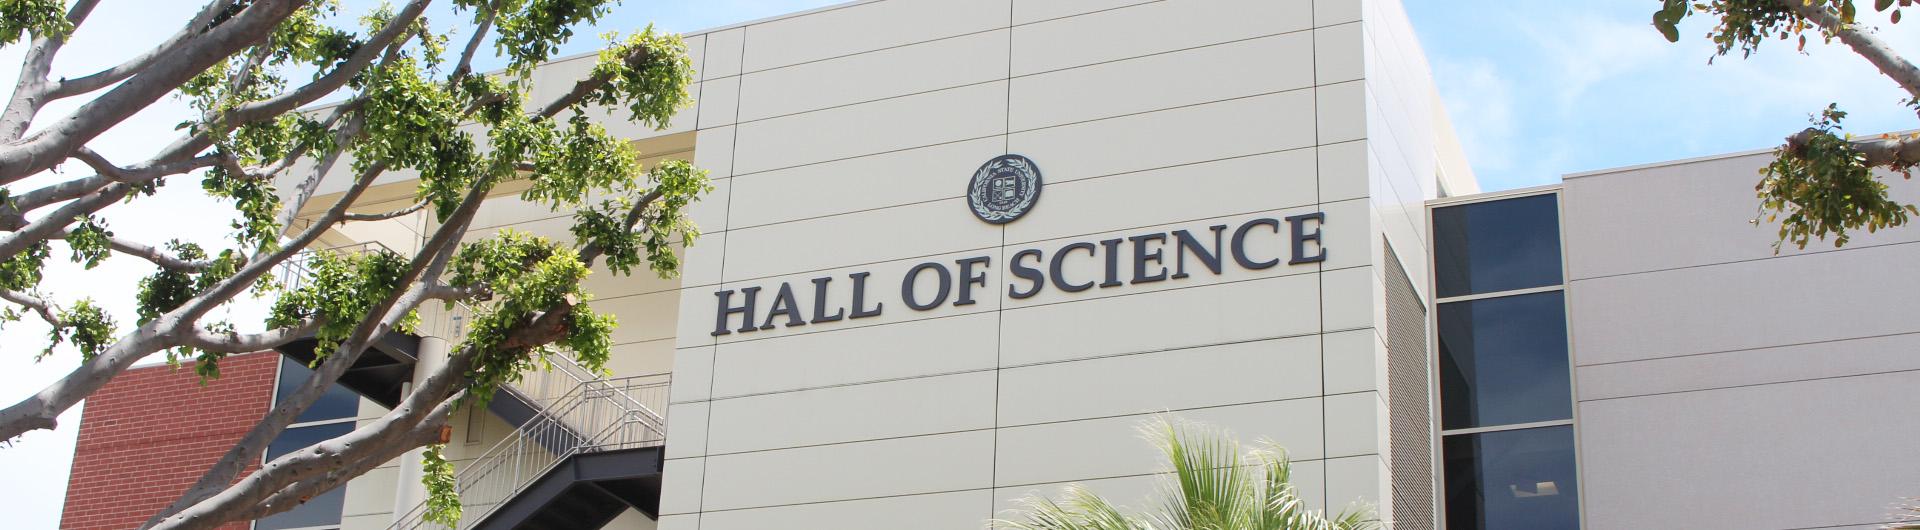 Hall of Science building